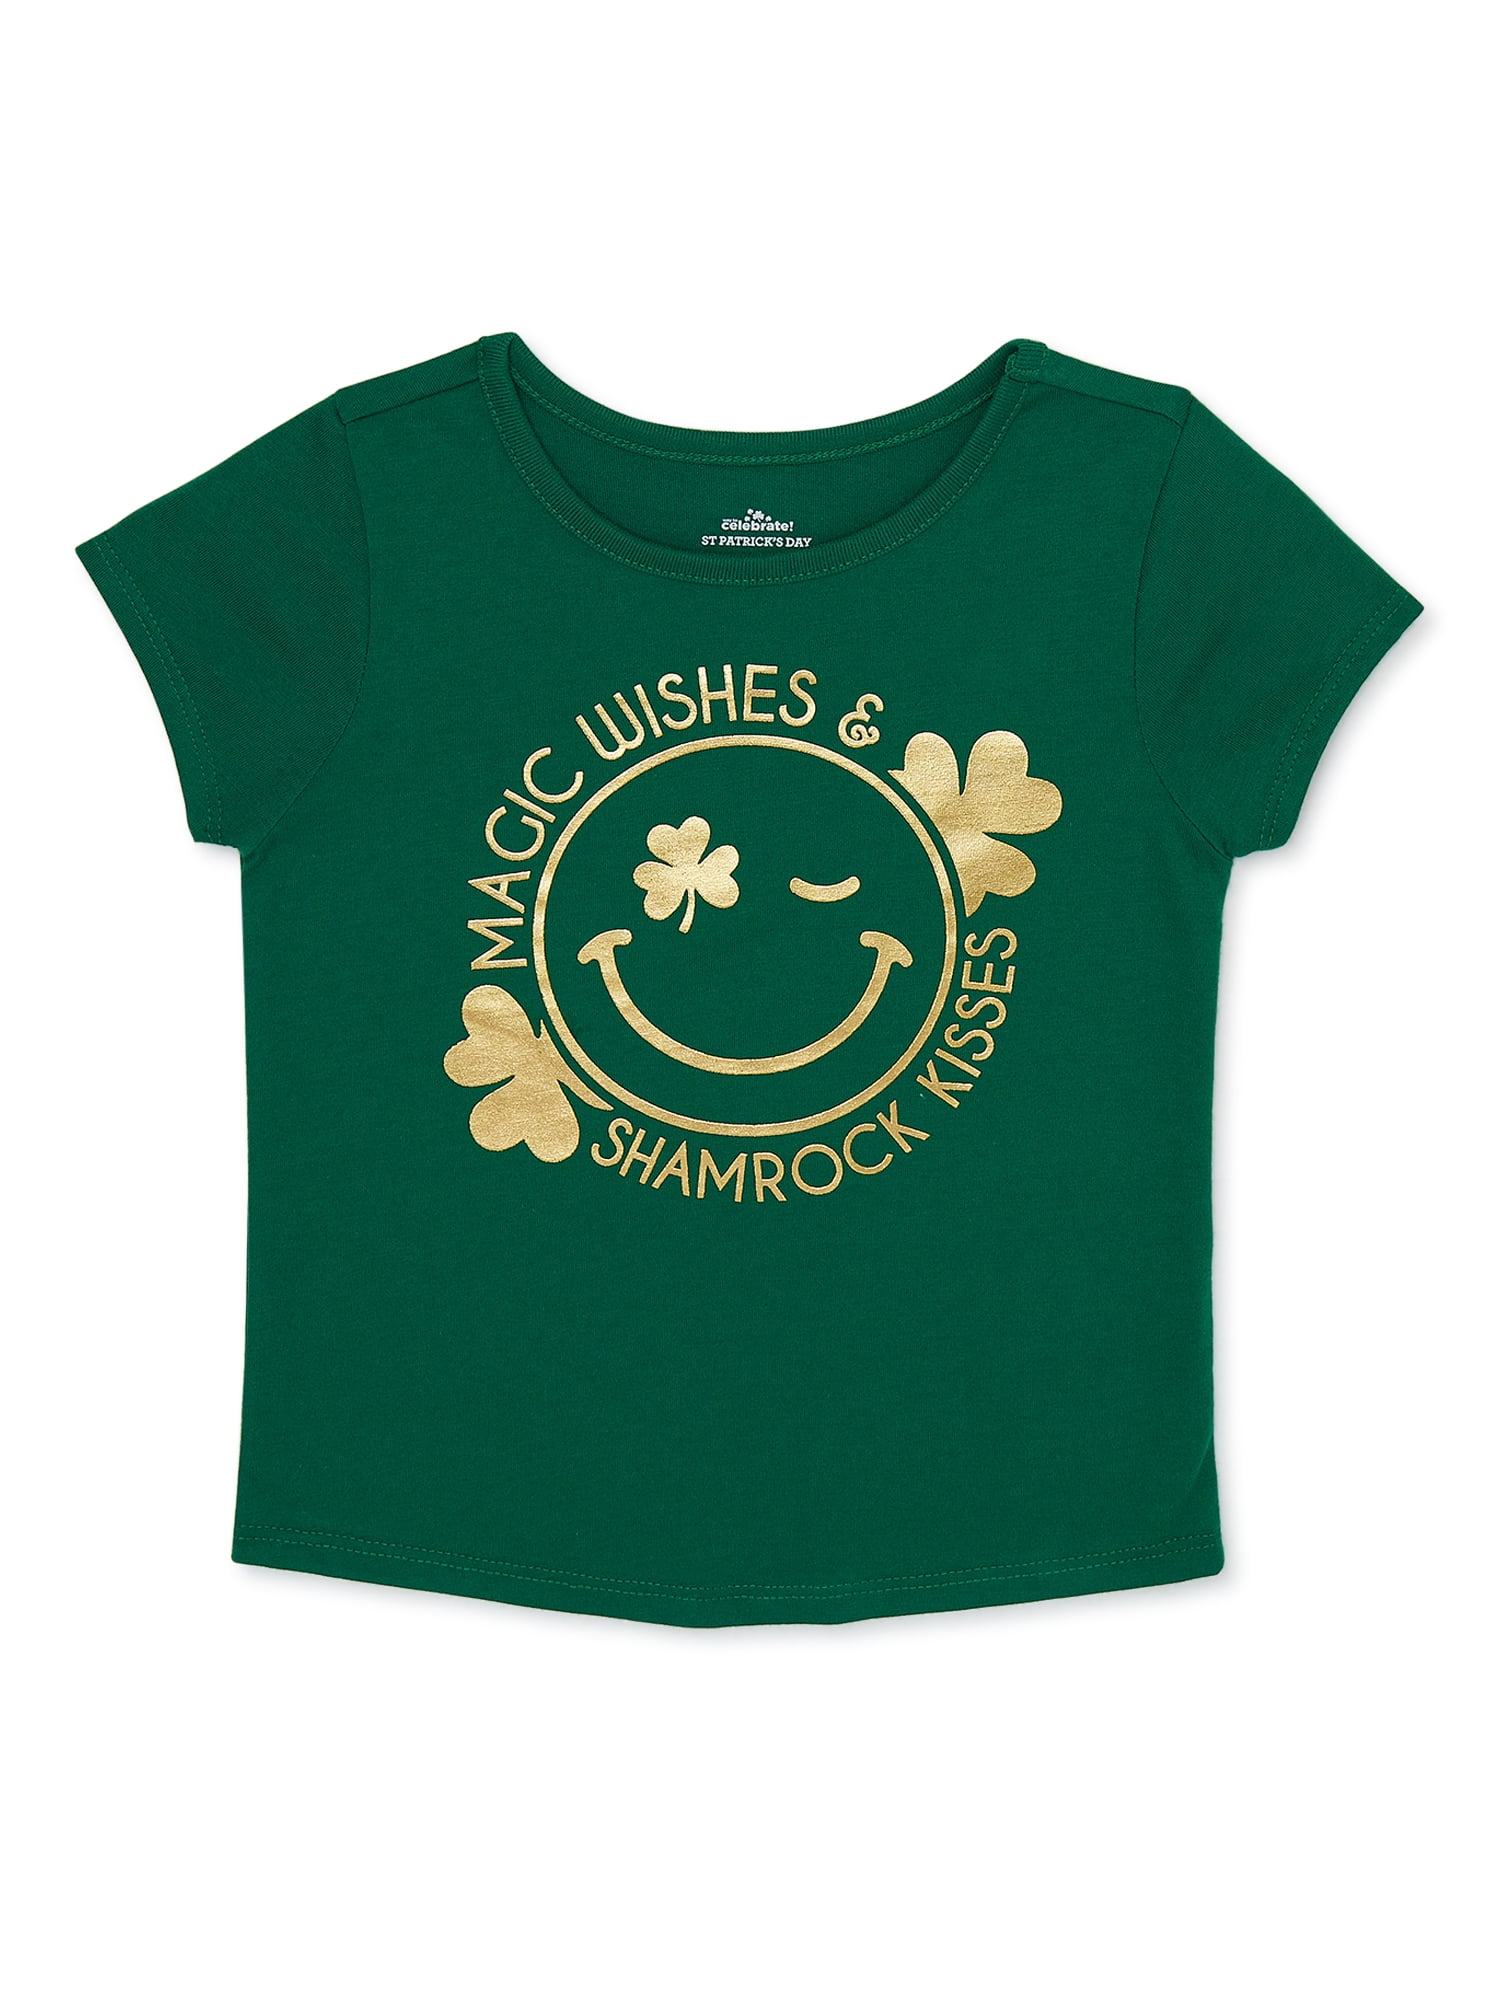 WAY TO CELEBRATE! St. Patrick's Day Baby and Toddler Girls Short Sleeve Graphic T-Shirt, Sizes 12 Months-5T